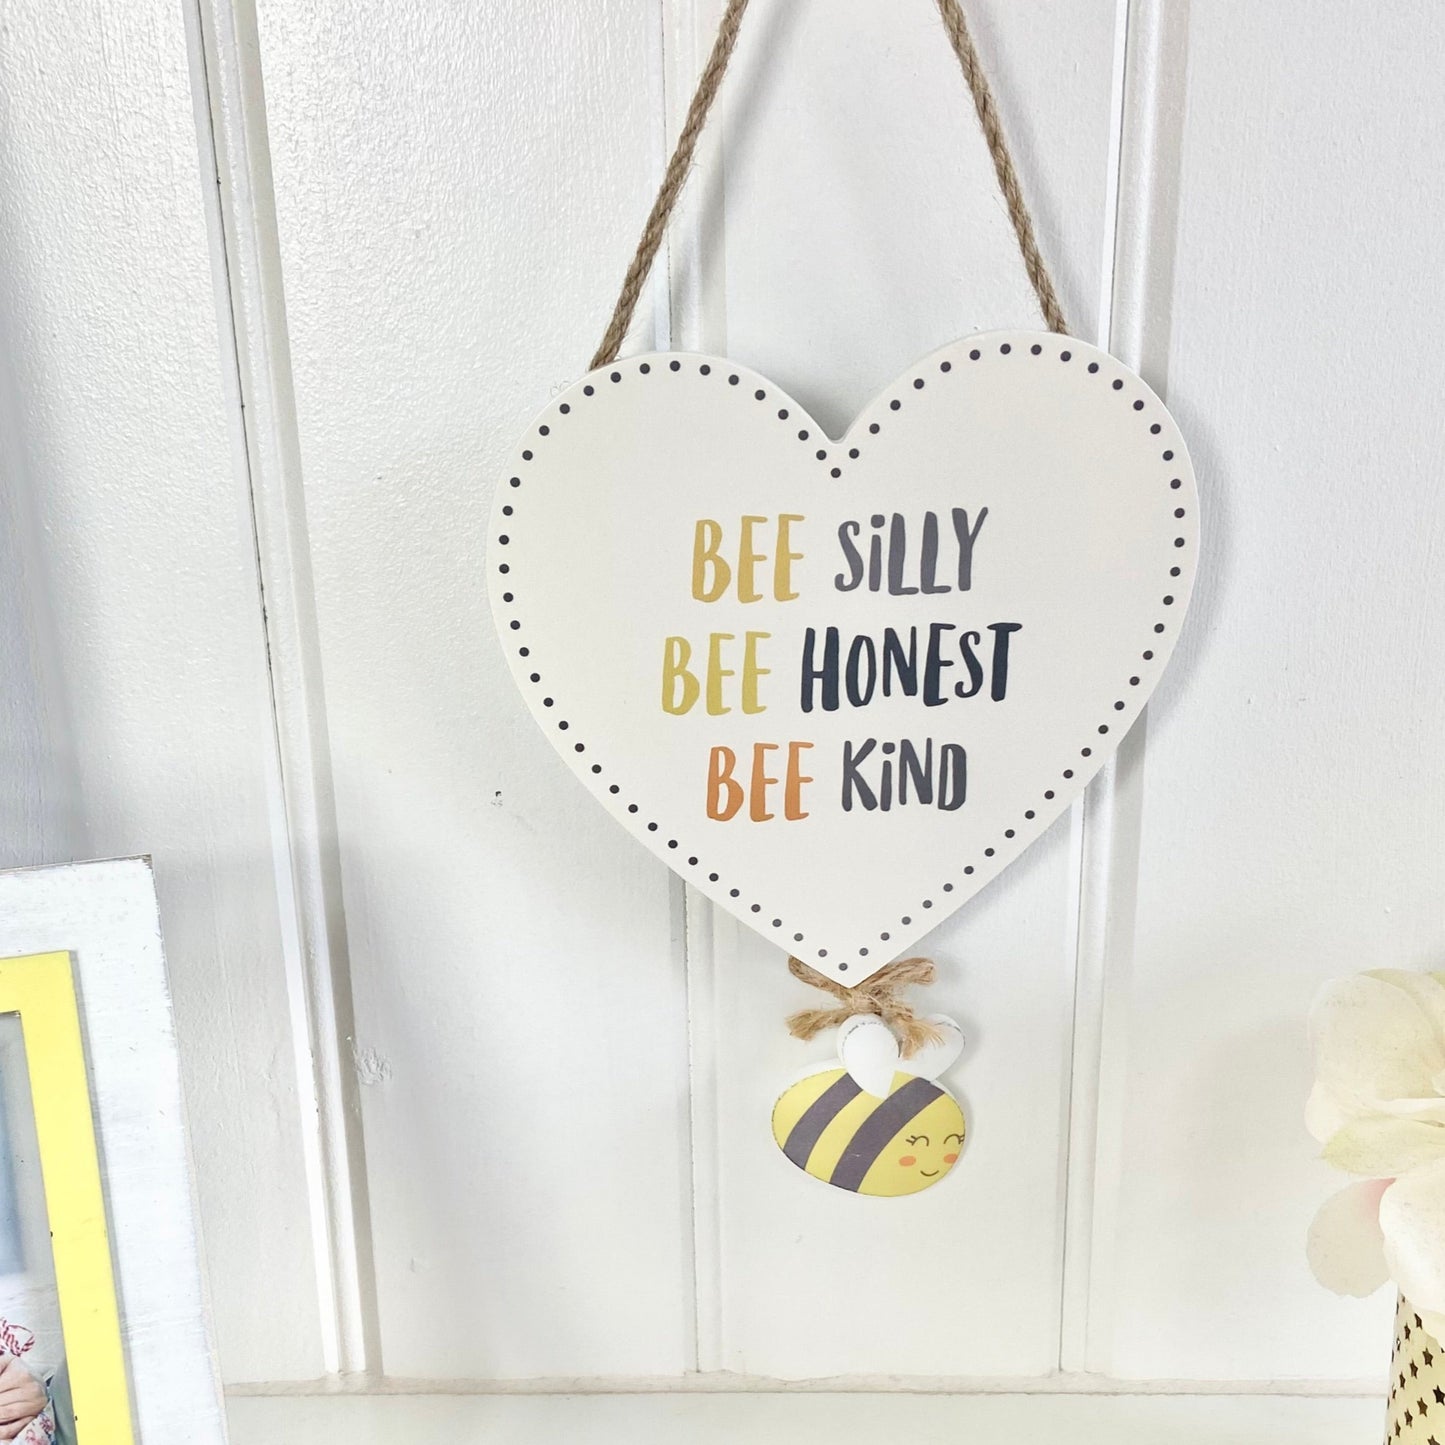 Bee Silly Kind & Honest Hanging Plaque - Penny Rose Home and Gifts